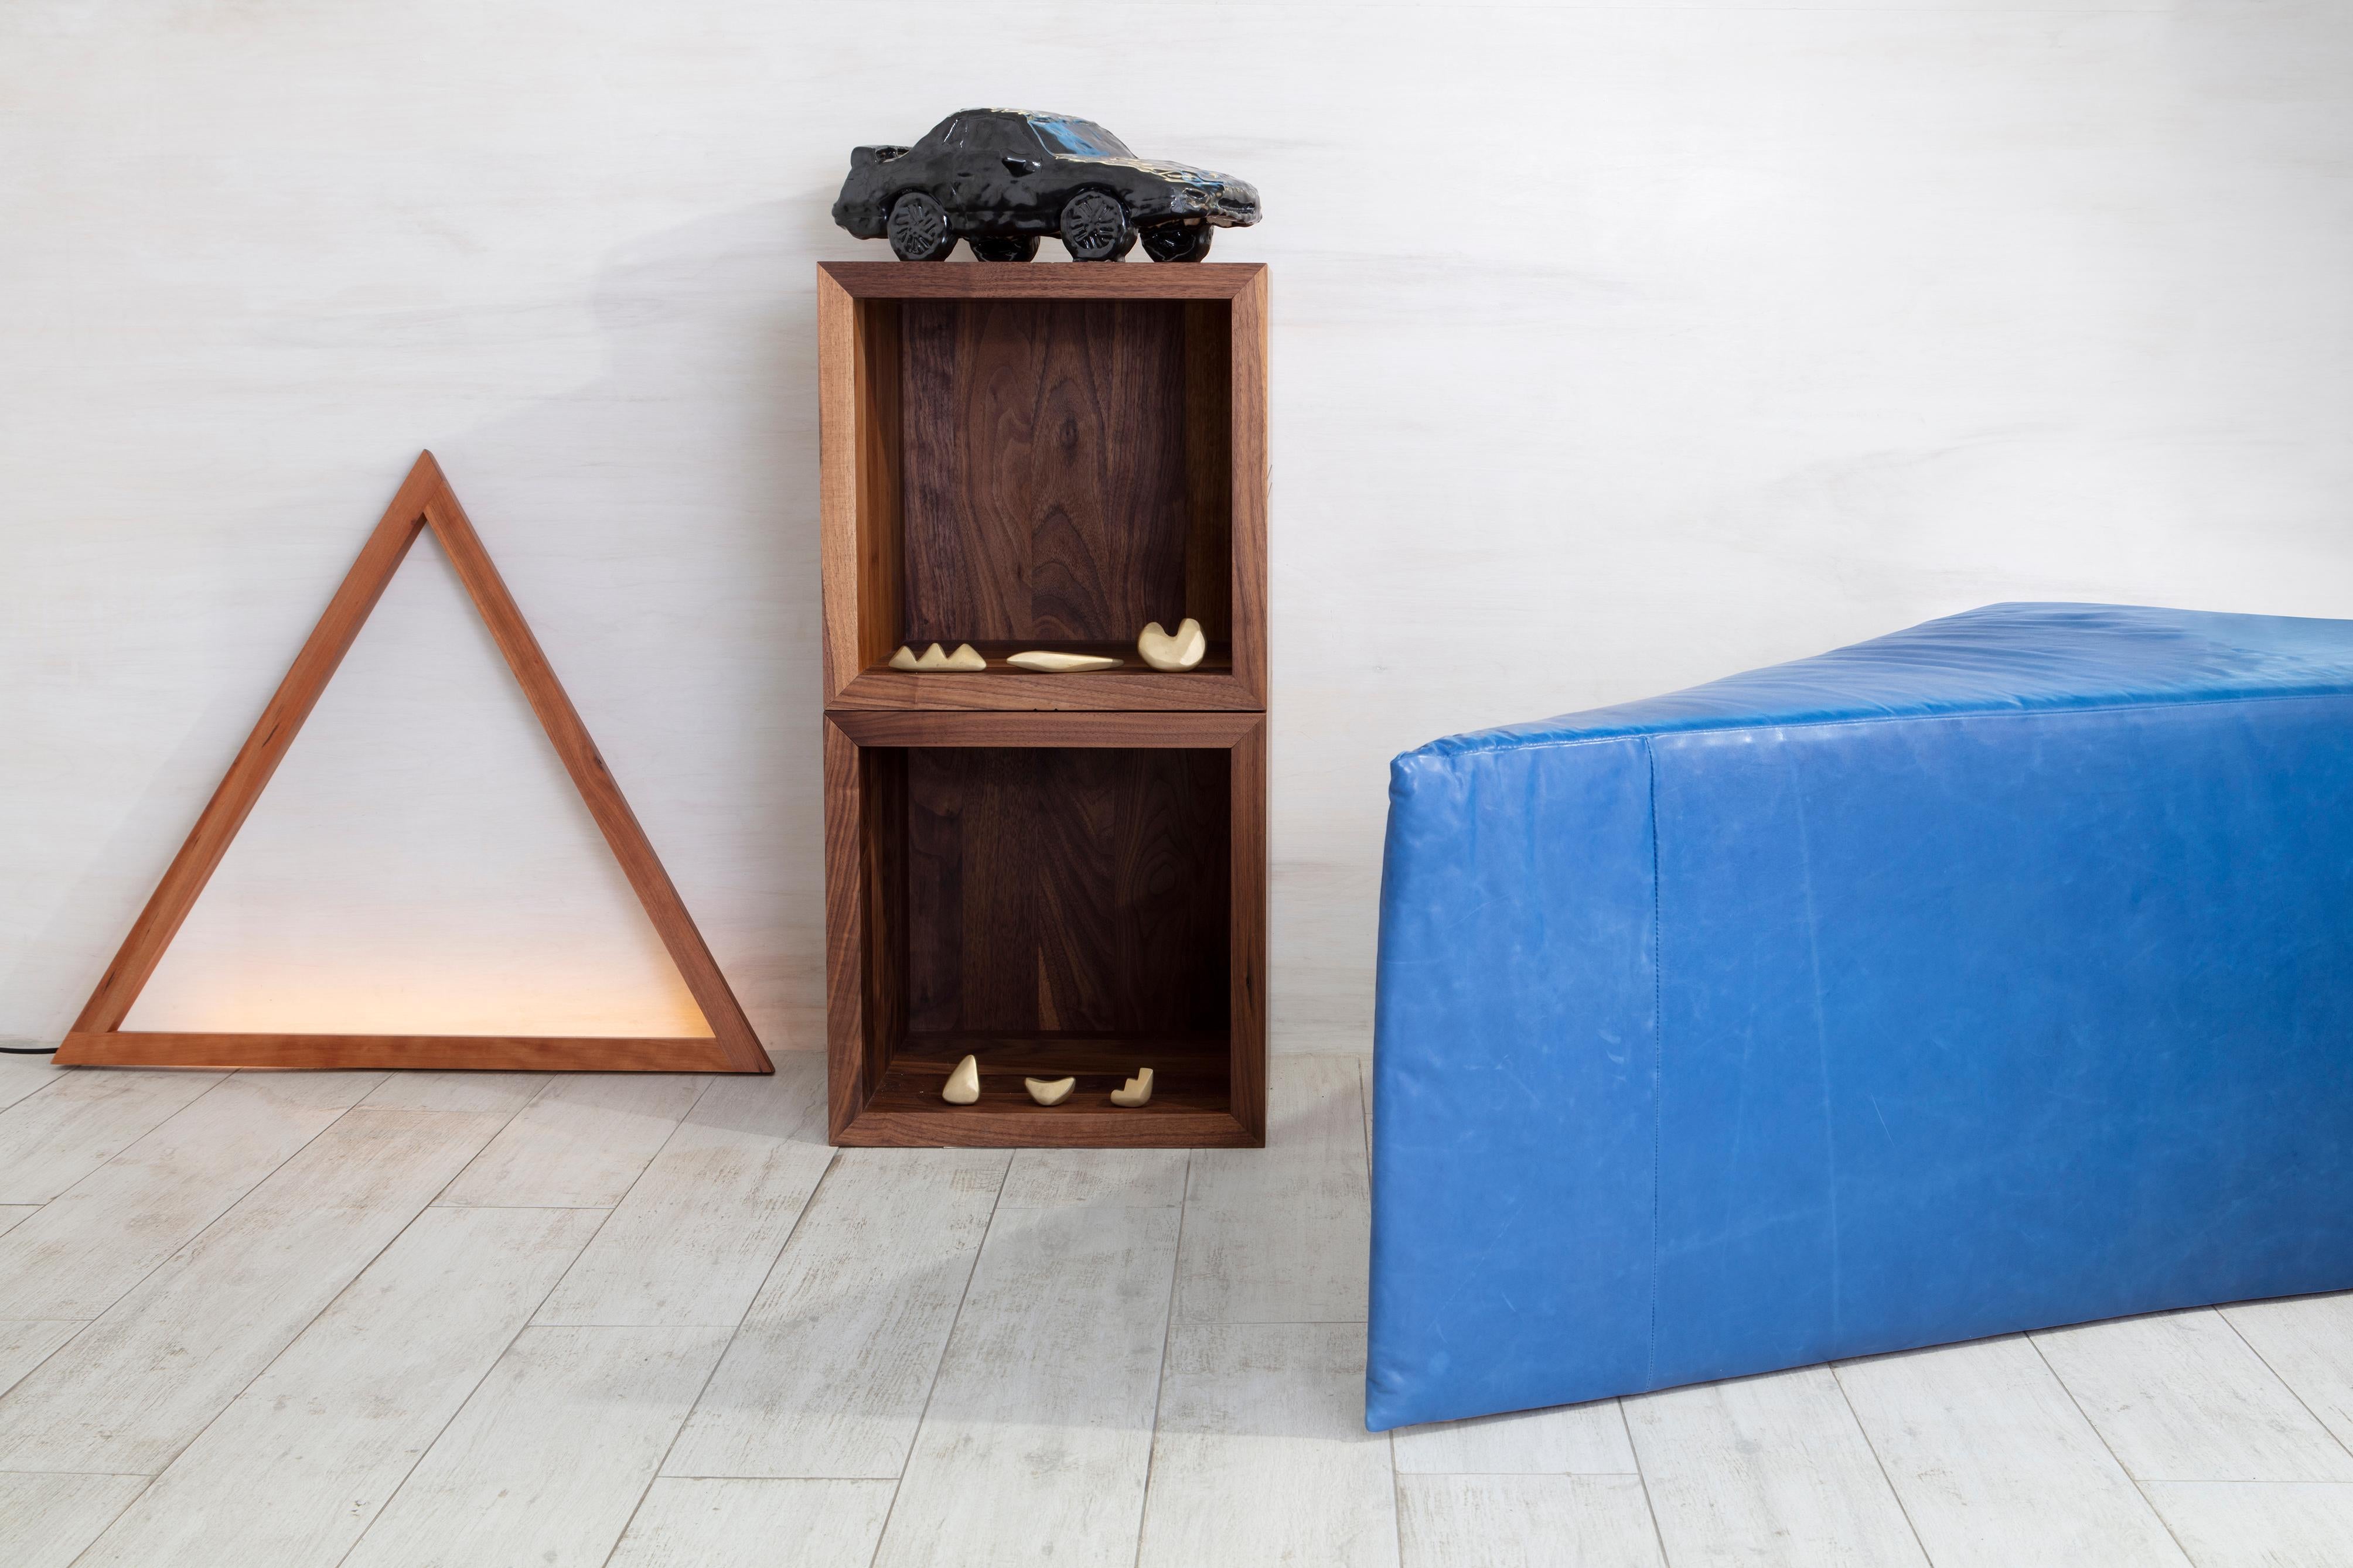 Carved lines wooden cube, walnut quad plaid

Noah James Spencer's Wooden Cubes are minimalist sculptures. Made in plain or carved patterned wood, they easily stand alone in a room, yet in multiples they become taller towers or room dividers. Plus,